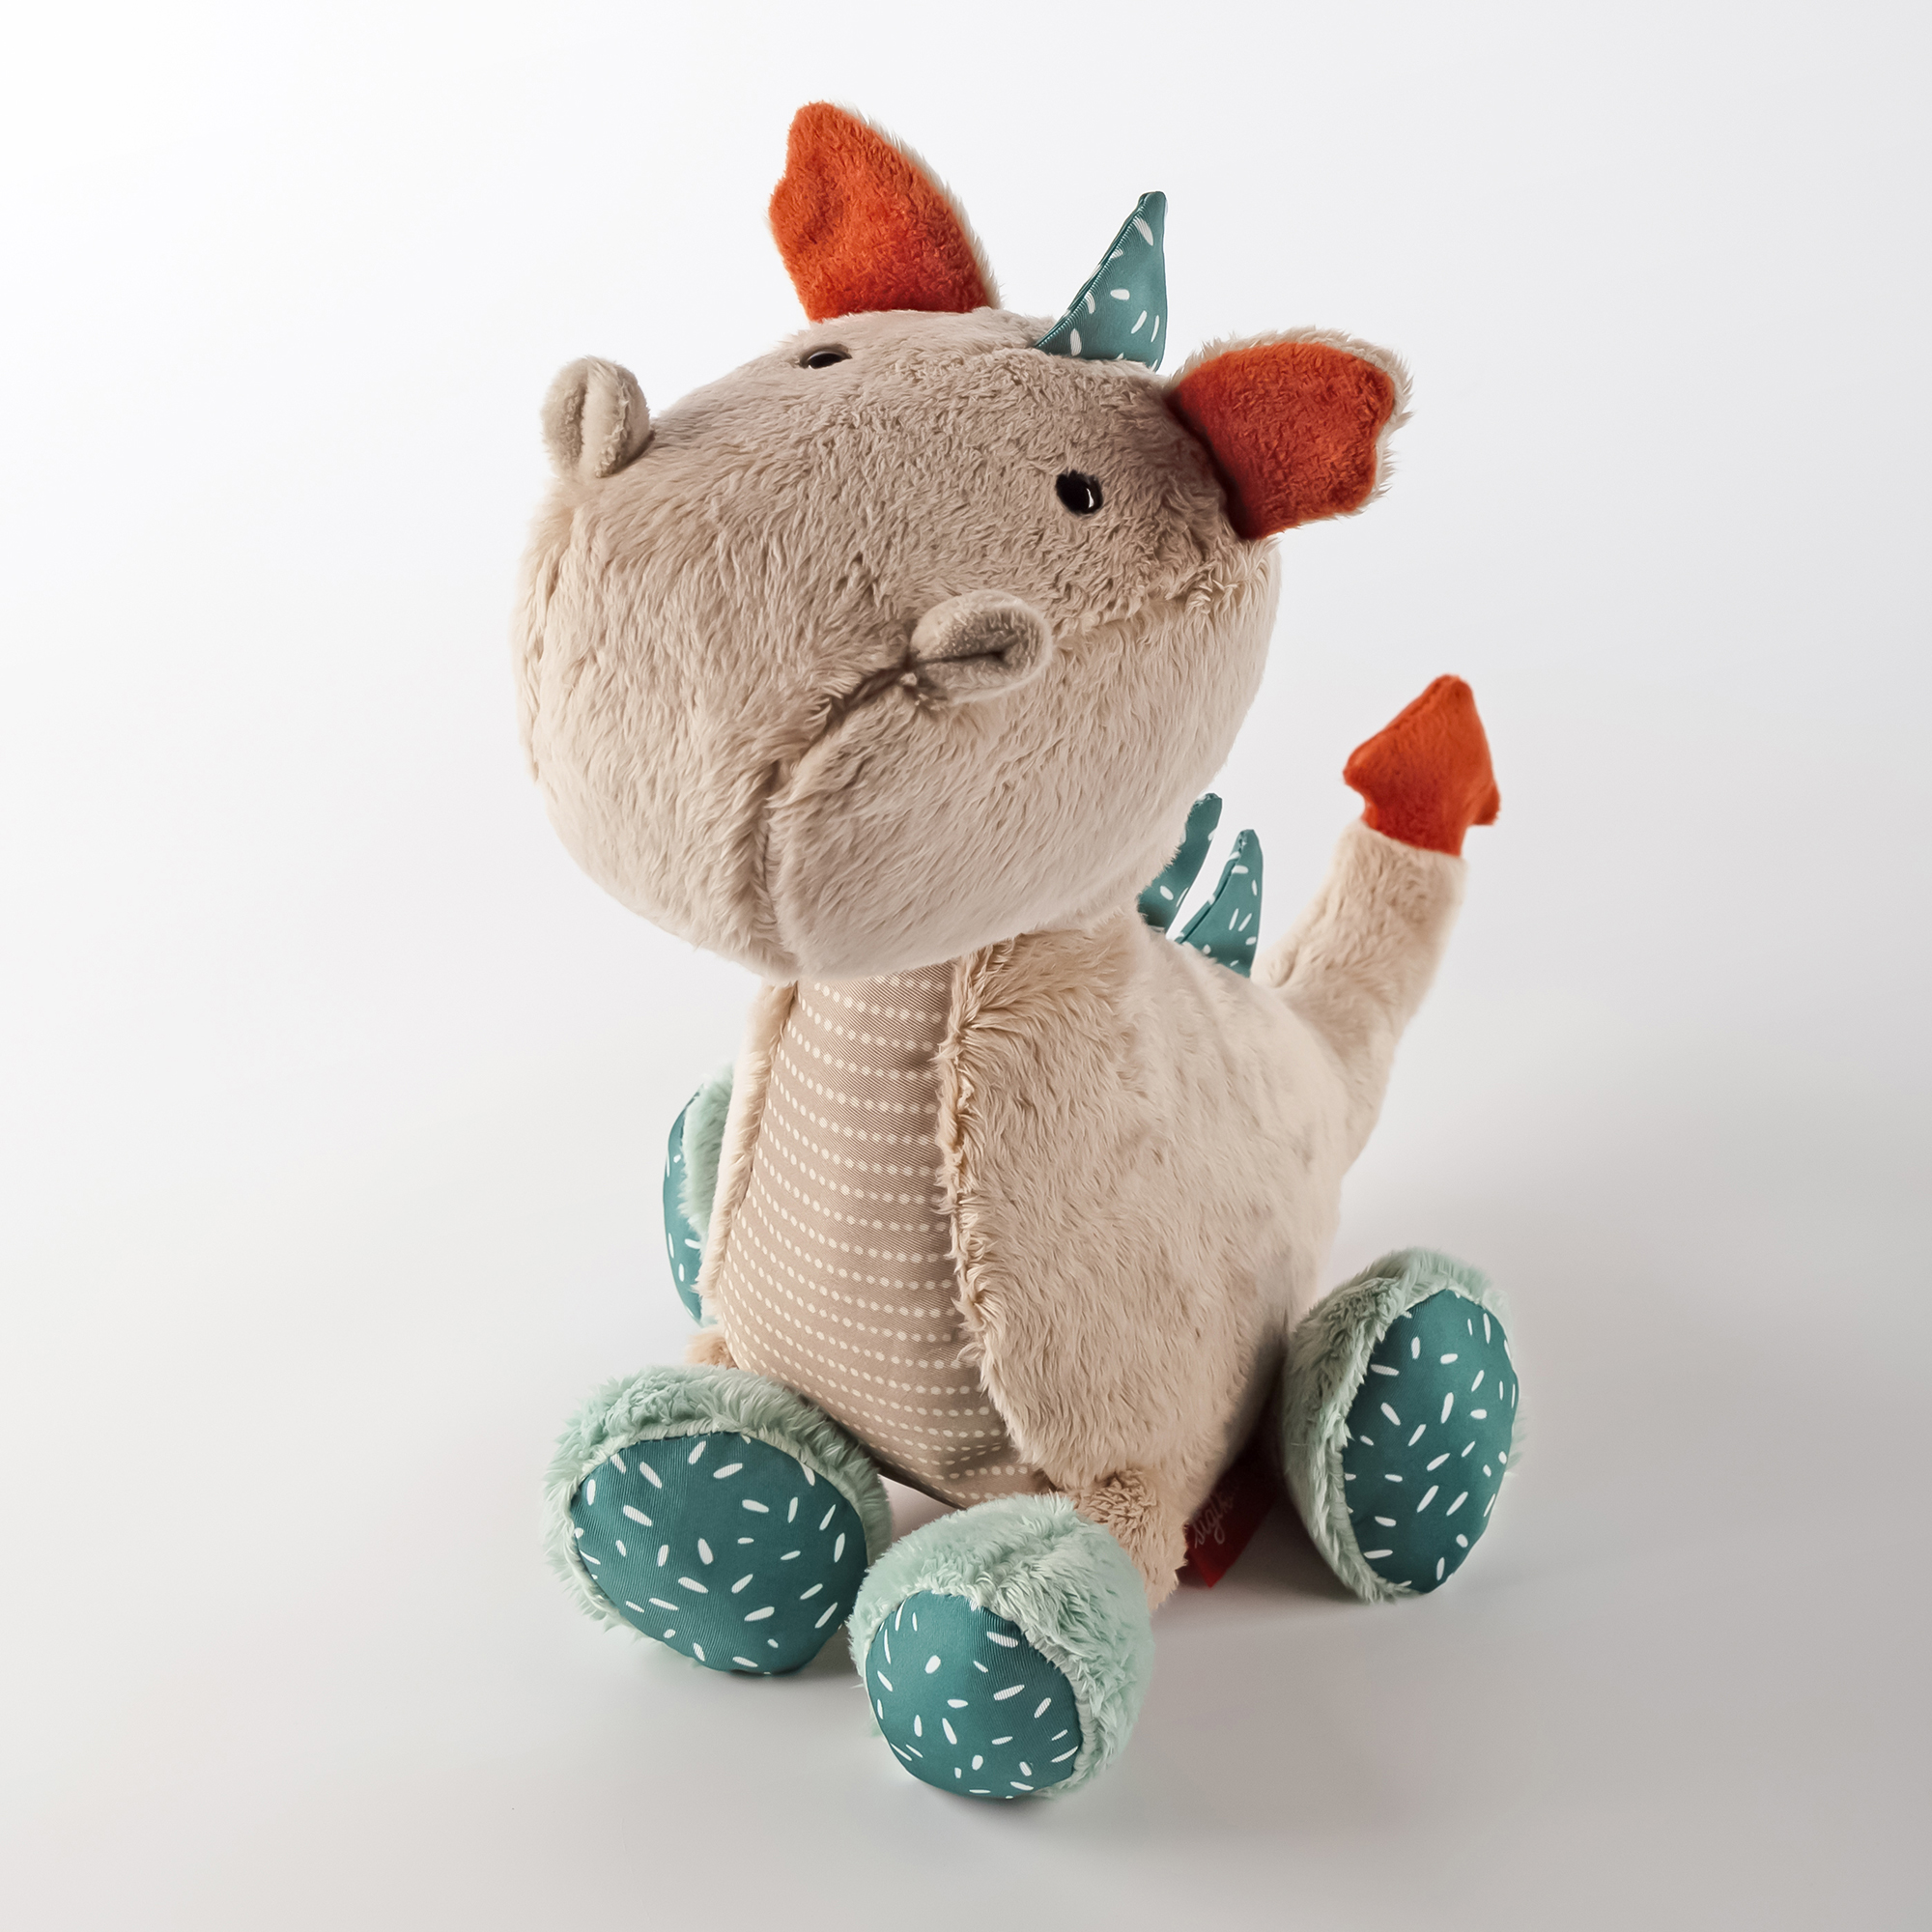 Plush toy baby dragon, Patchwork Sweety